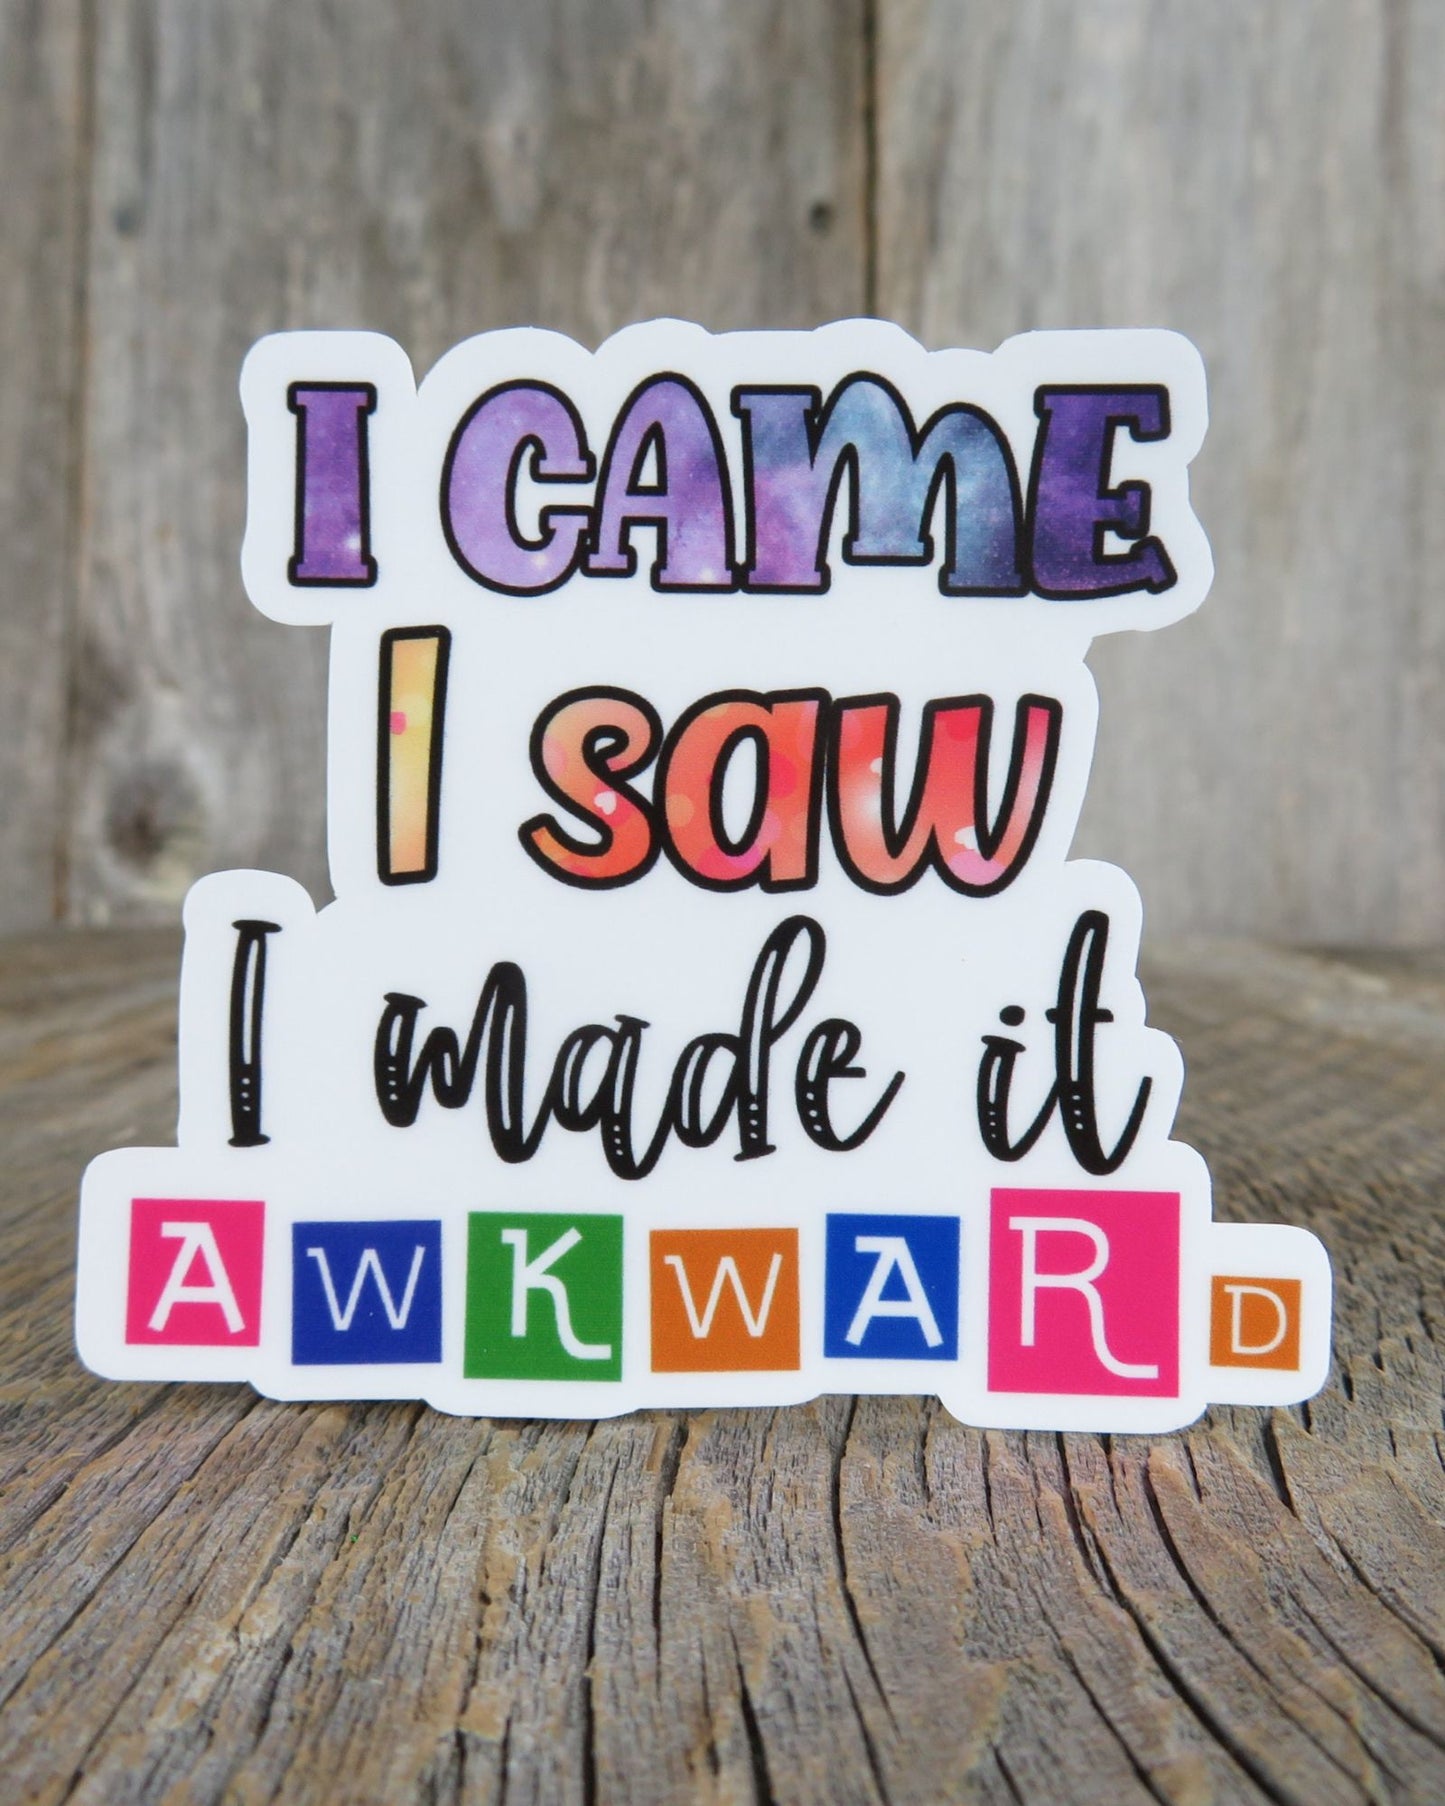 I Came I Saw I Made it Awkward Sticker Full Color Social Funny Sarcastic Water Bottle Sticker